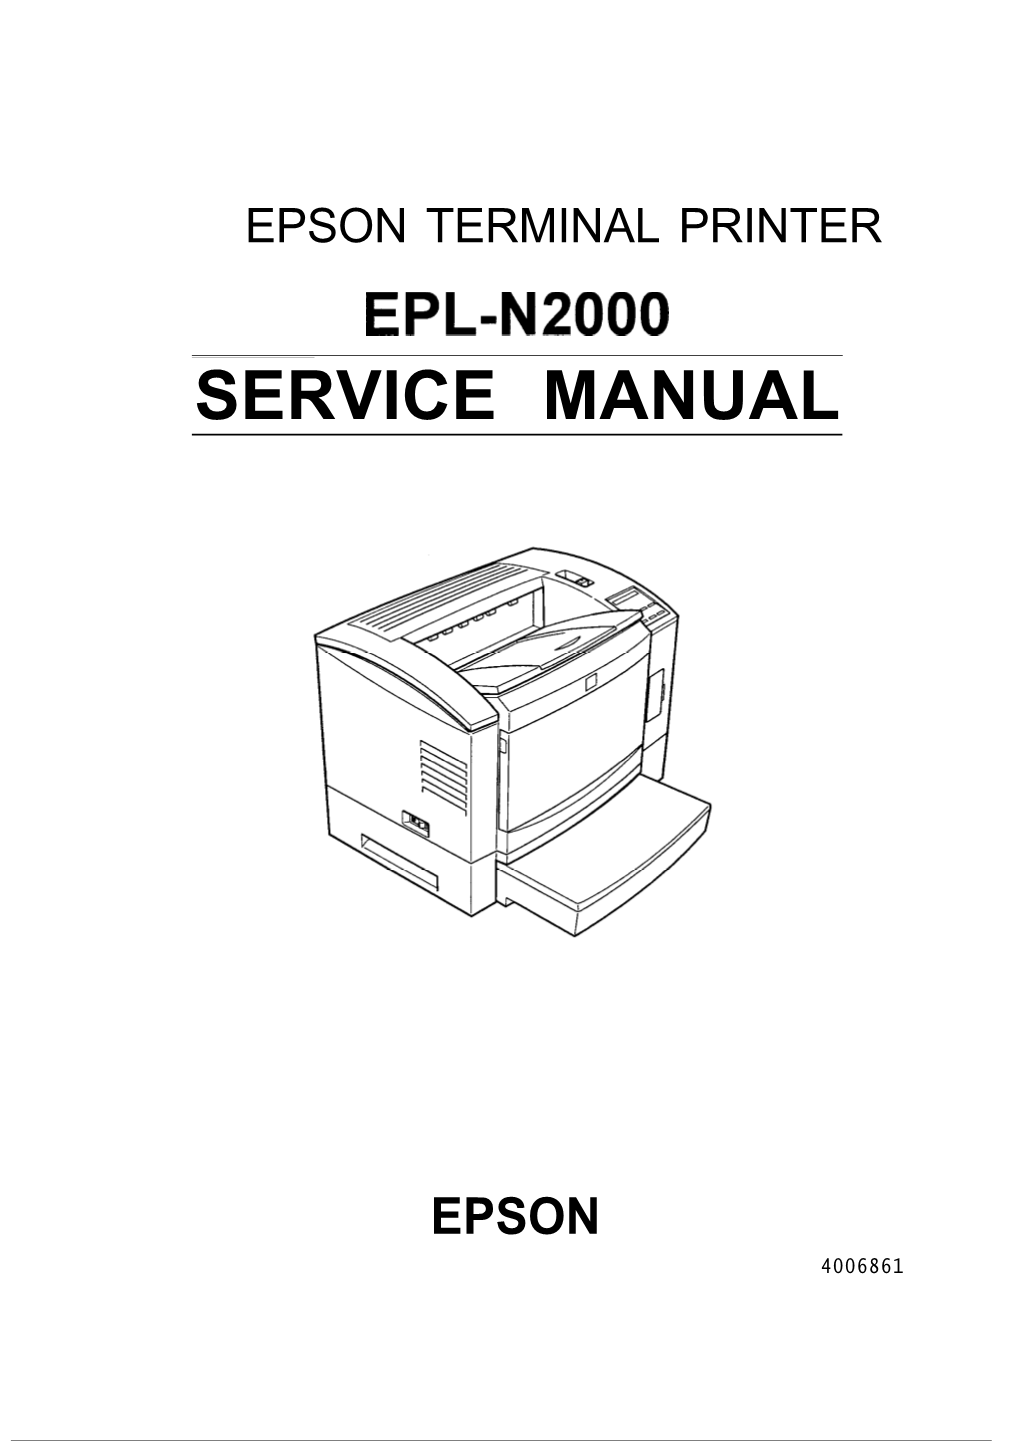 EPSON EPL-N2000 Is a Non-Impact Page Printer That Combines a Semi-Conductor Laser with Electrophotographic Technology